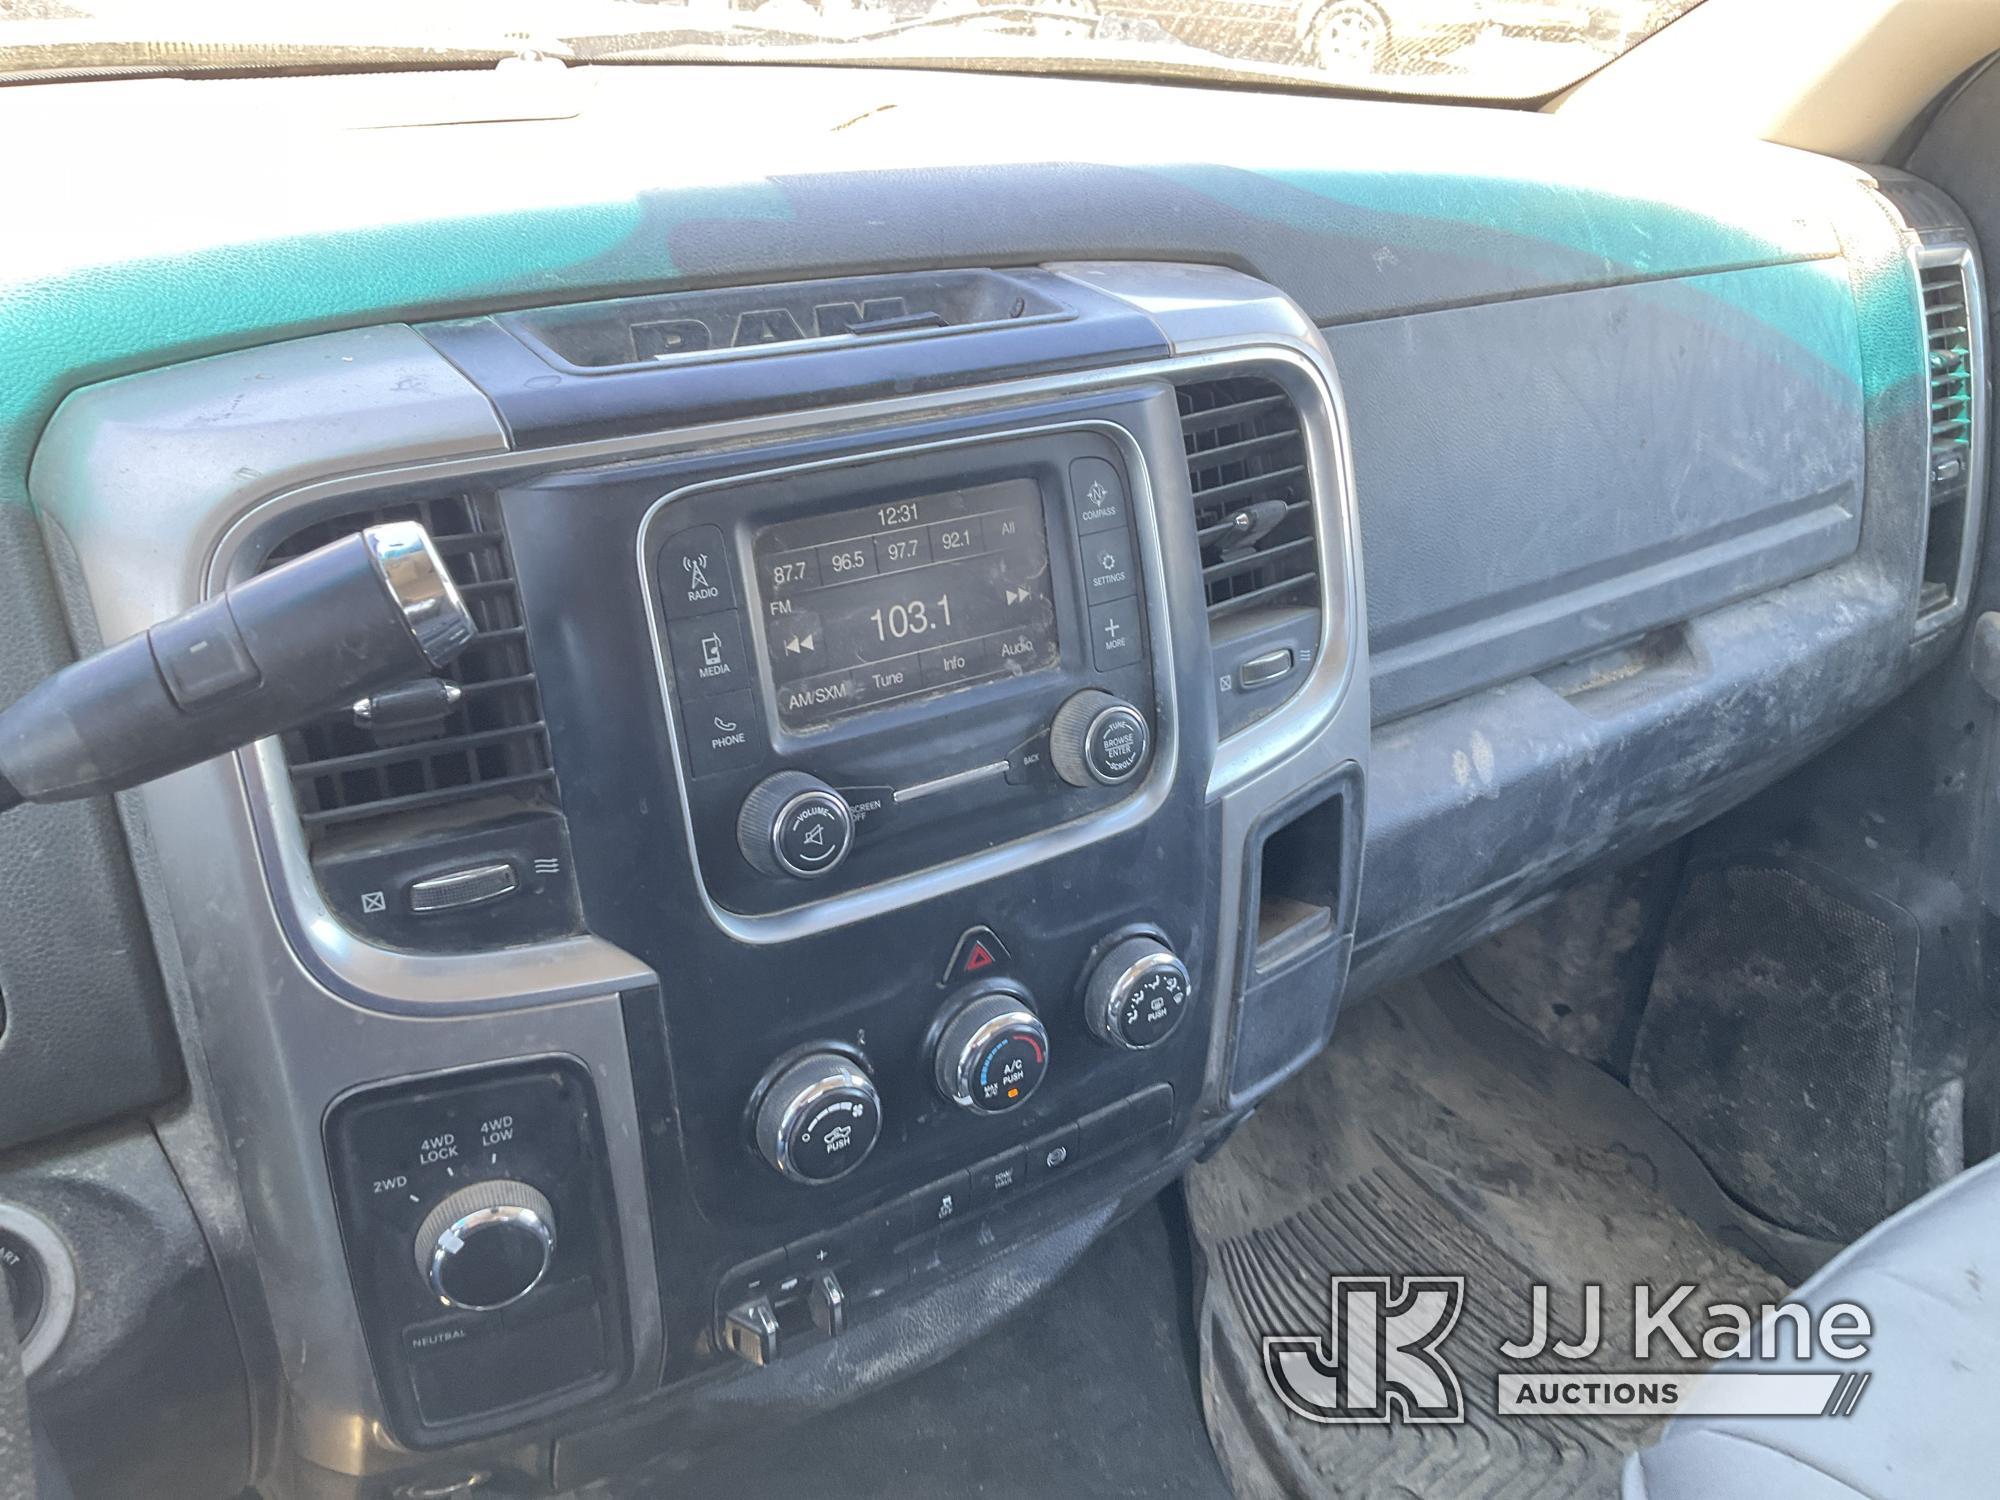 (Castle Rock, CO) 2017 RAM 3500 4x4 Crew-Cab Pickup Truck Runs & Moves) (Check Engine Light On, Tail